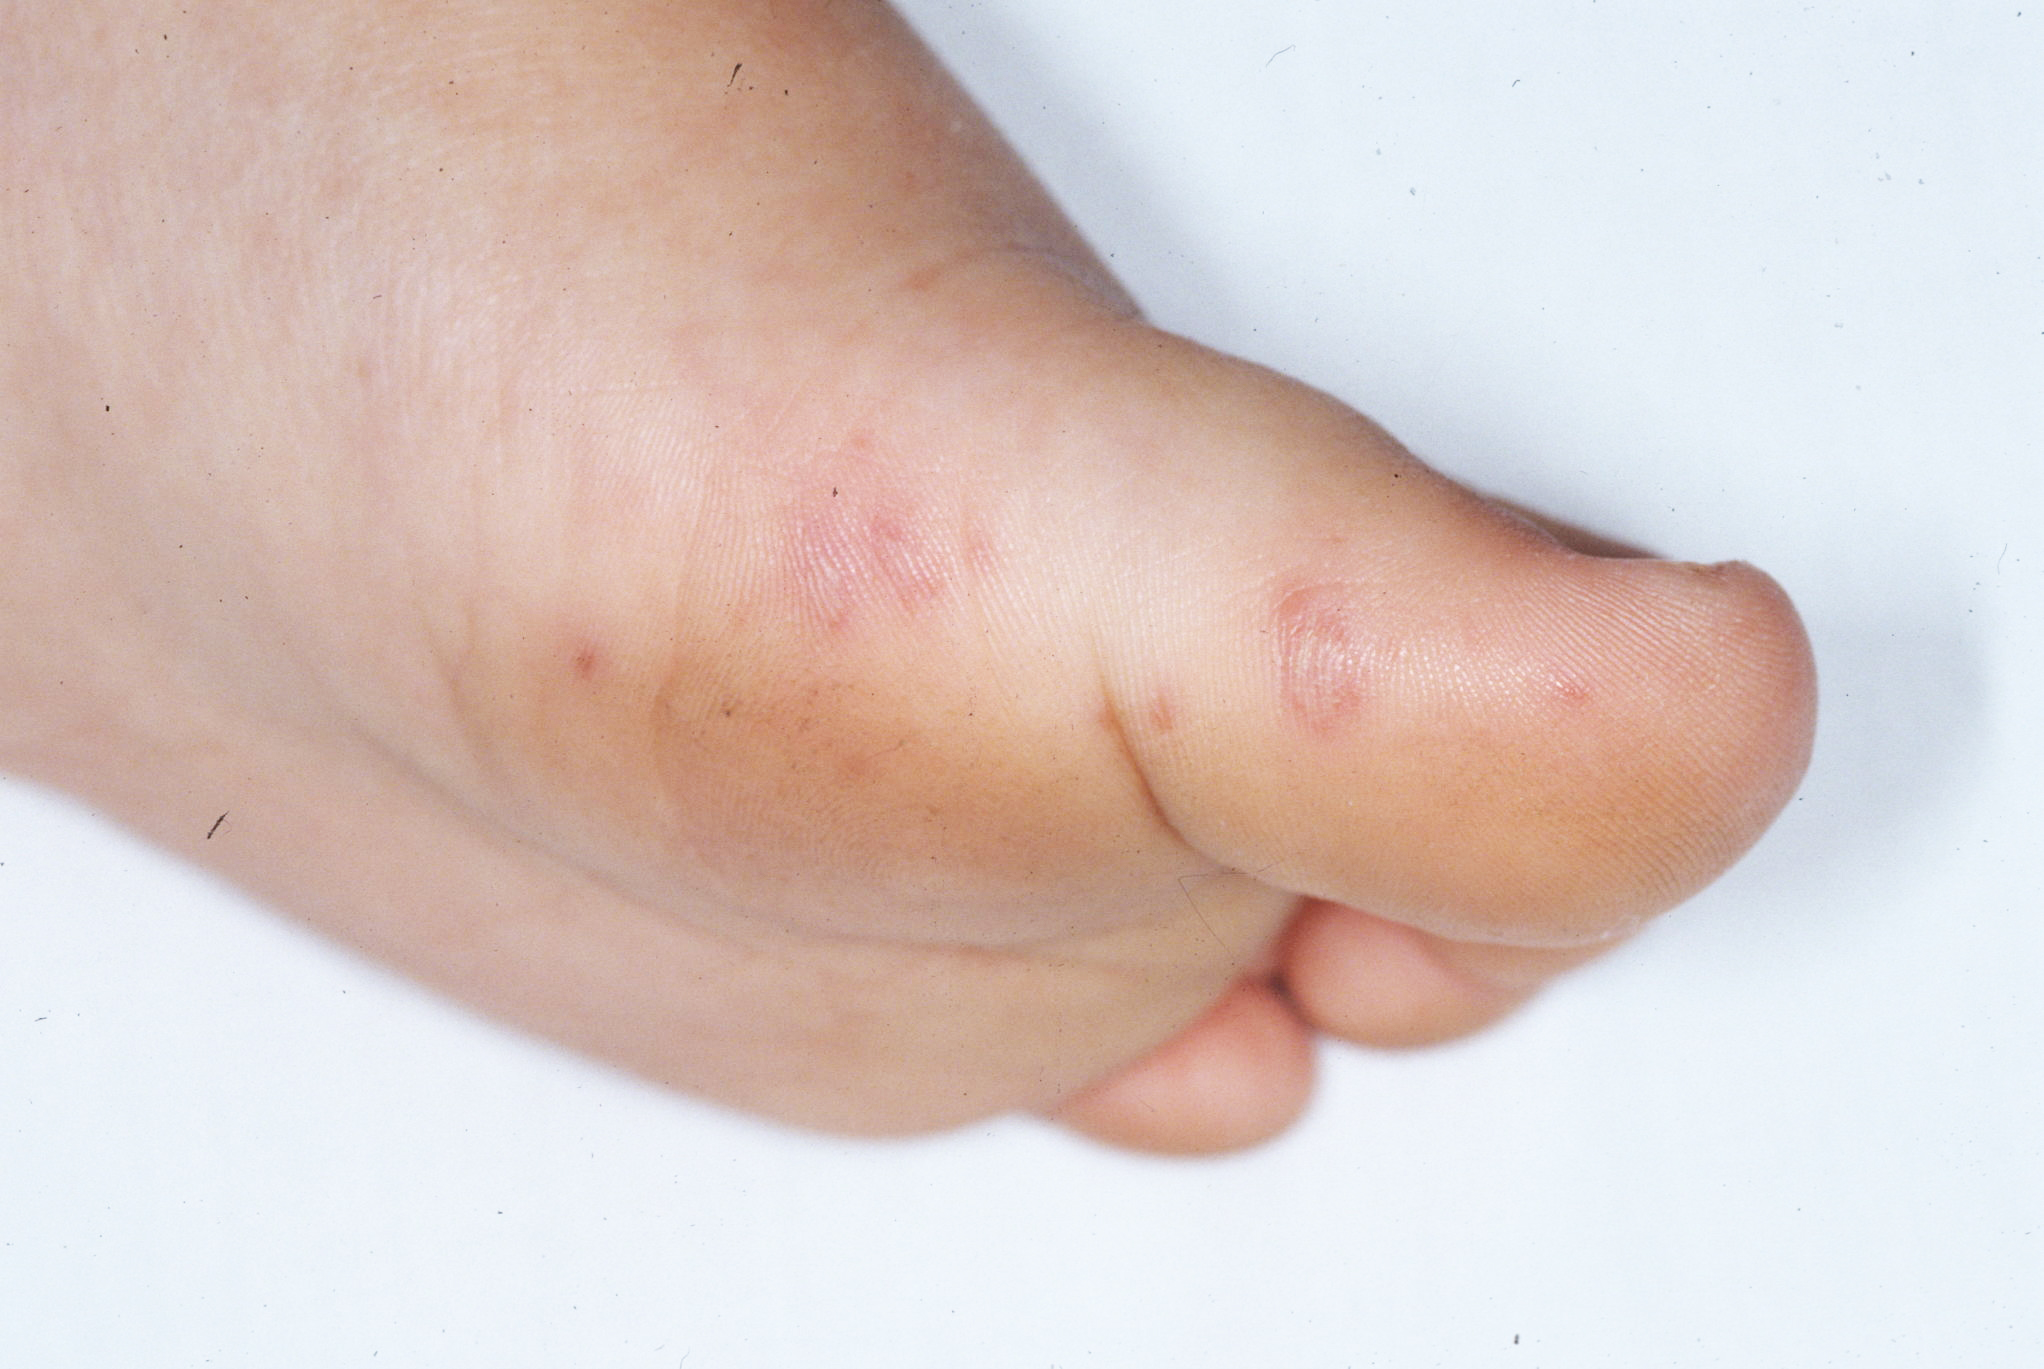 a child's foot with red sores being examined for hand, foot and mouth disease